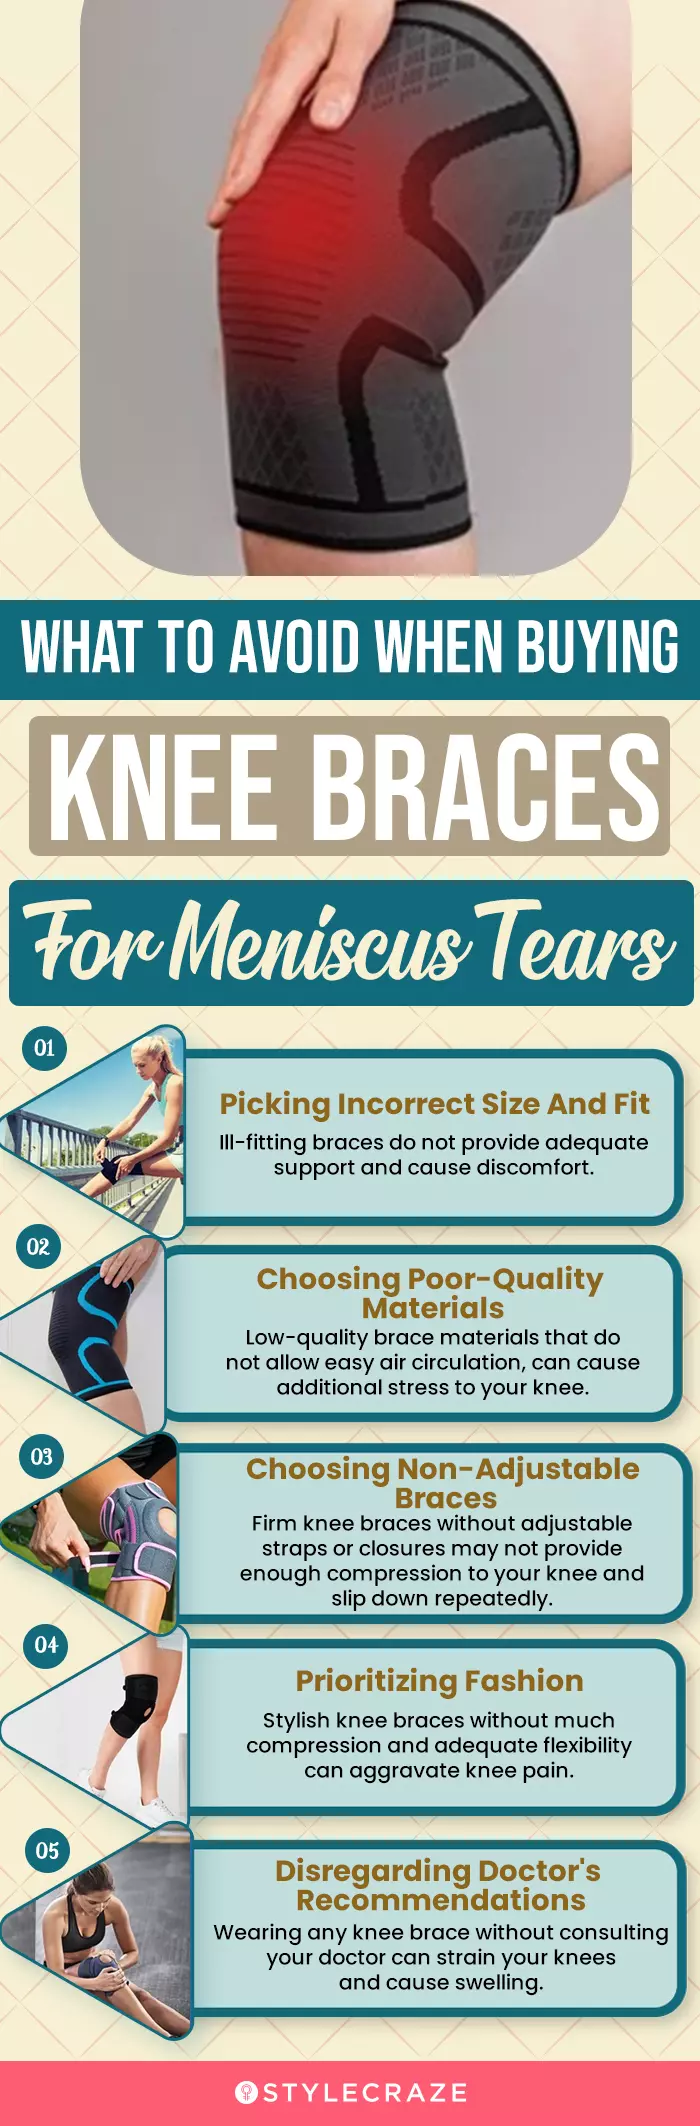 What To Avoid When Buying Knee Braces For Meniscus Tears (infographic)